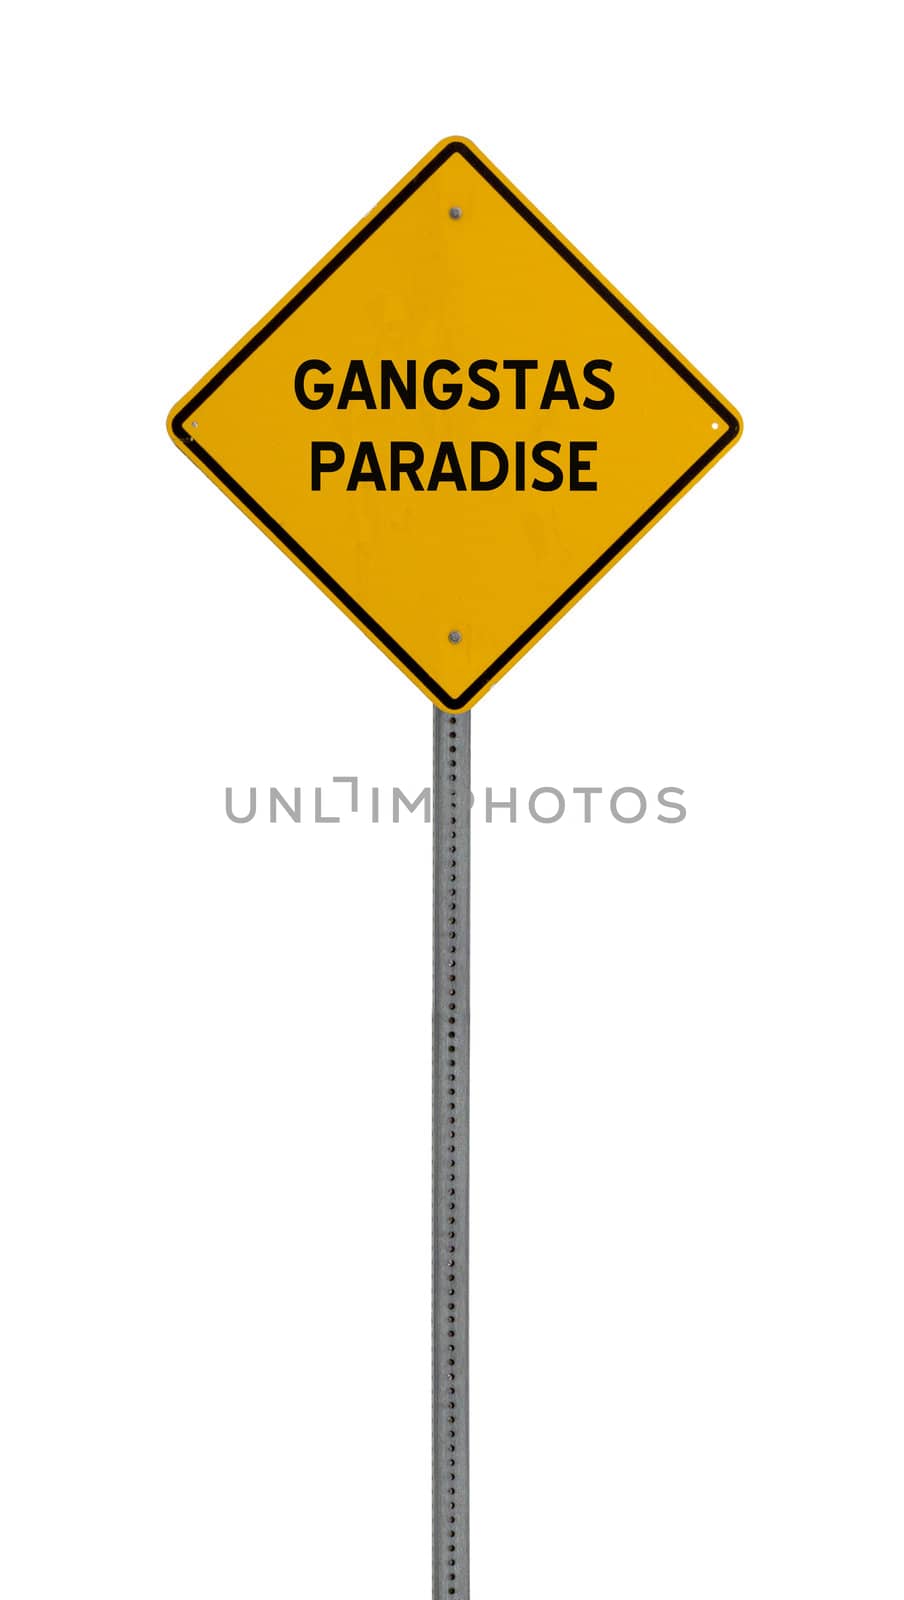 gangstas paradise - Yellow road warning sign by jeremywhat